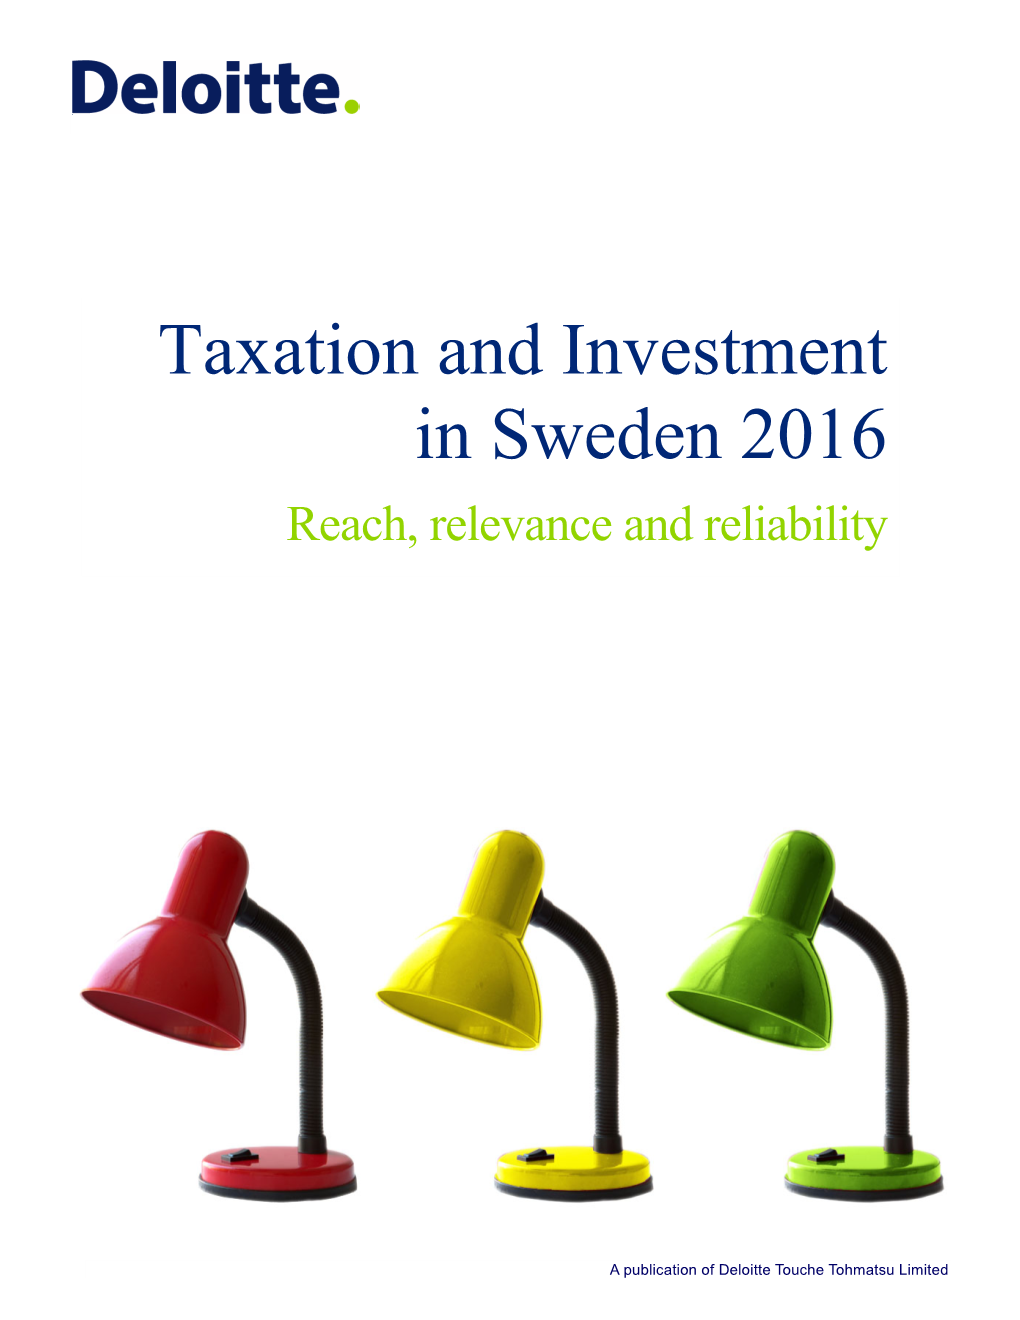 Taxation and Investment in Sweden 2016 Reach, Relevance and Reliability